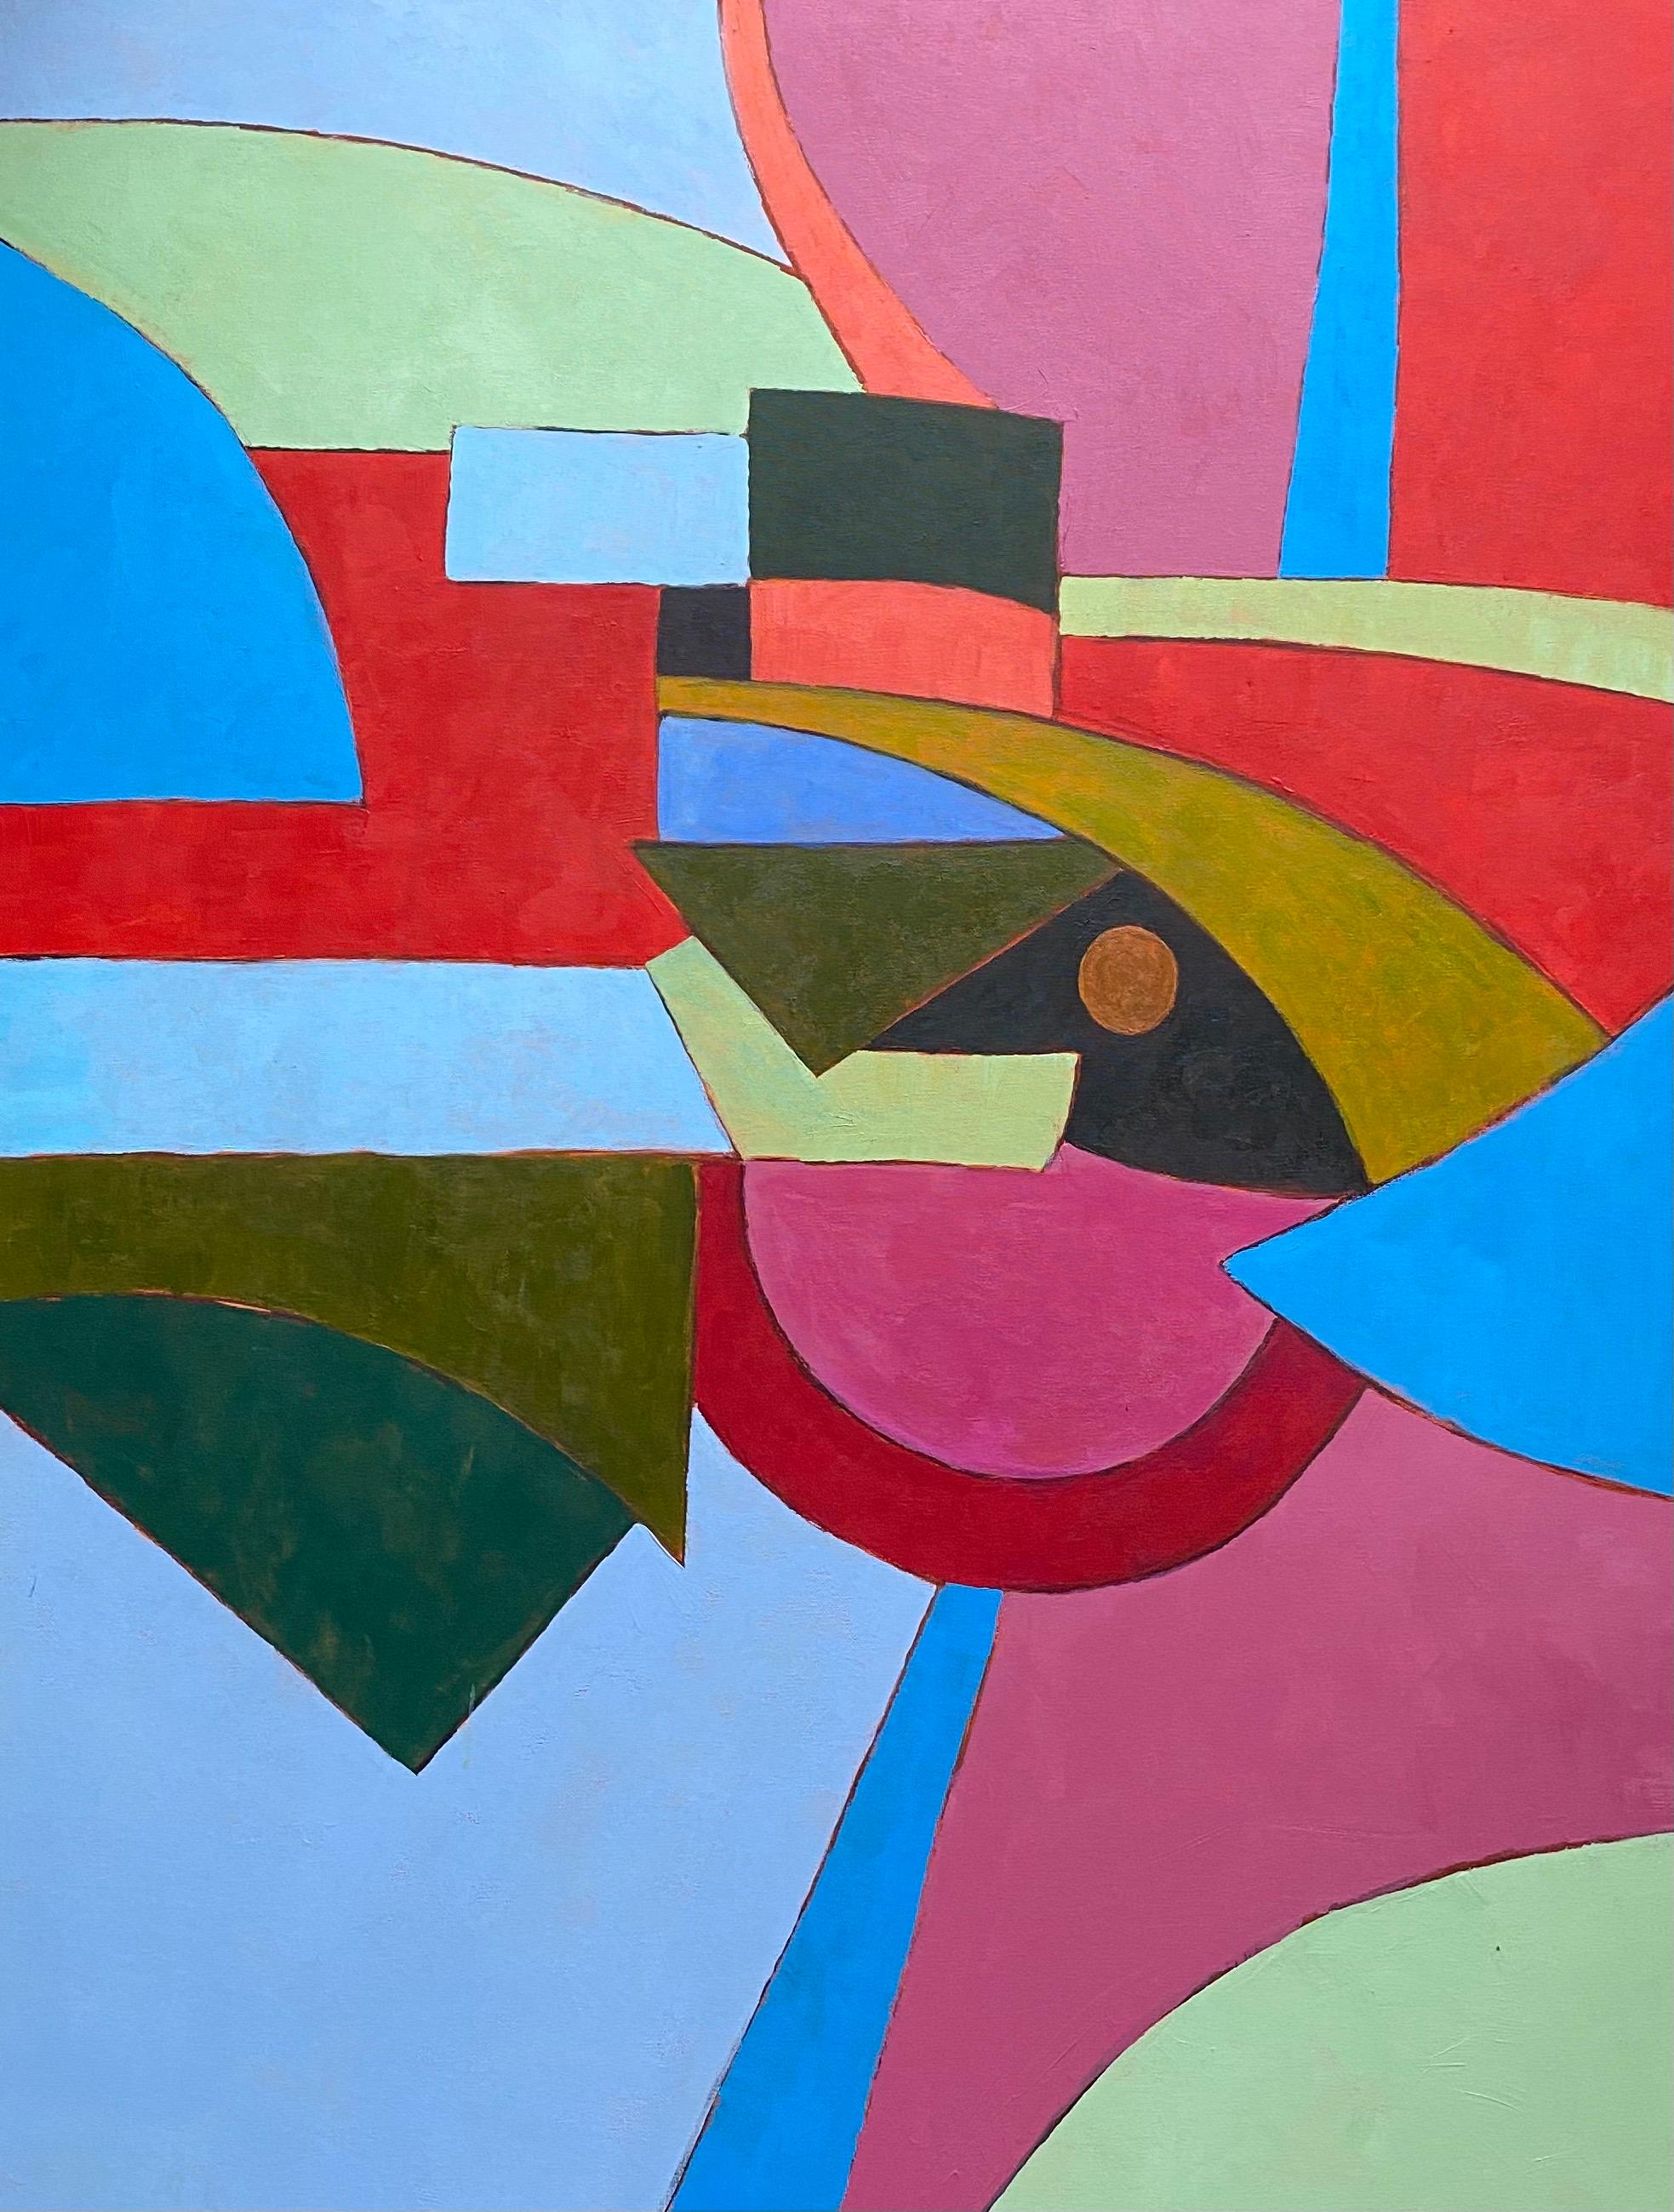 Geometric Abstract Painting by Listed British artist - Mix of Bright Colors